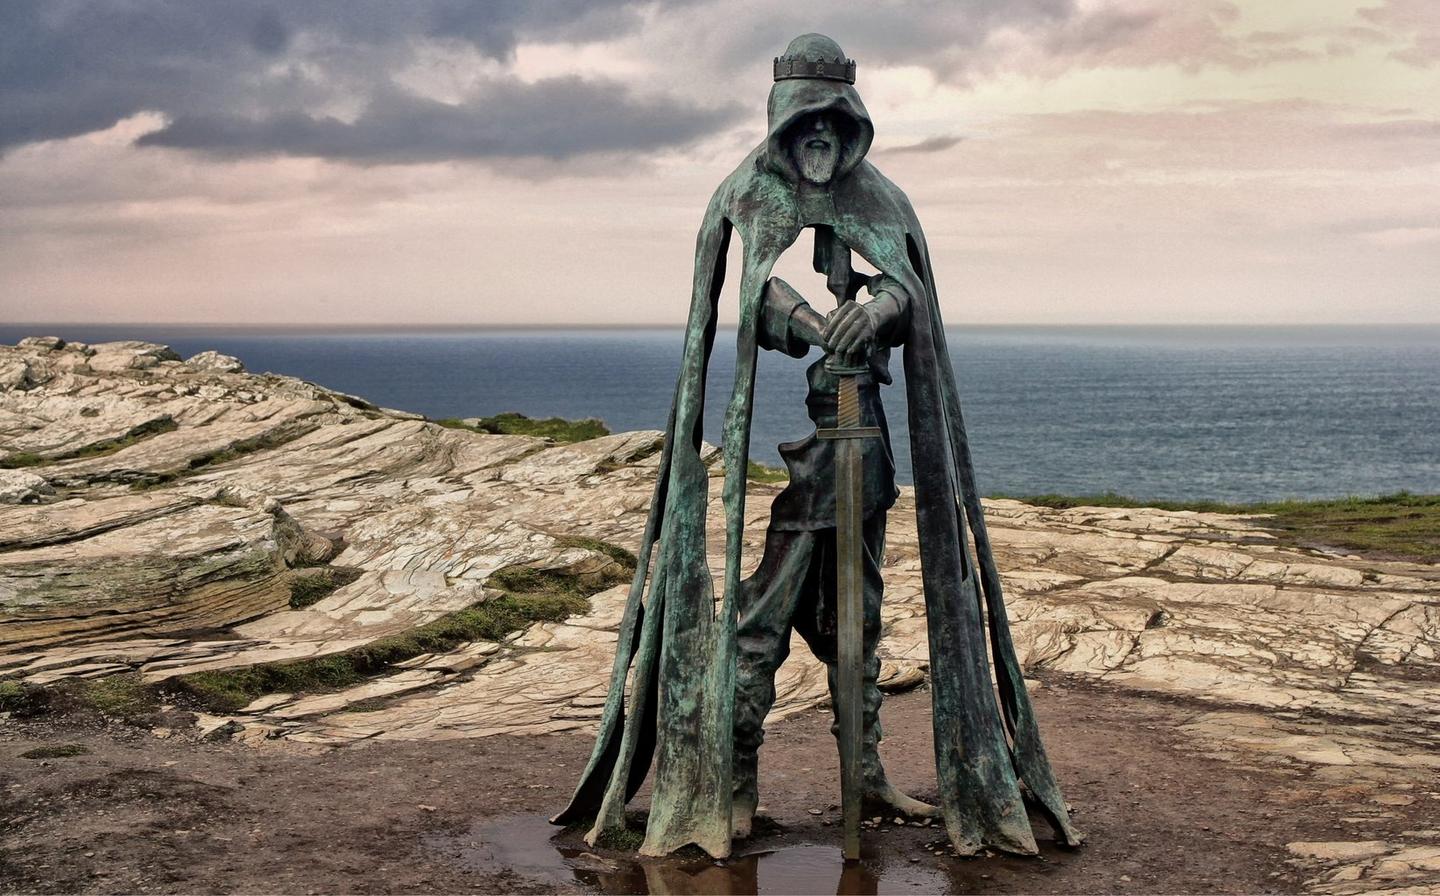 A bonze sculpture of King Arthur on the cliffs of Tintagel, Cornwall